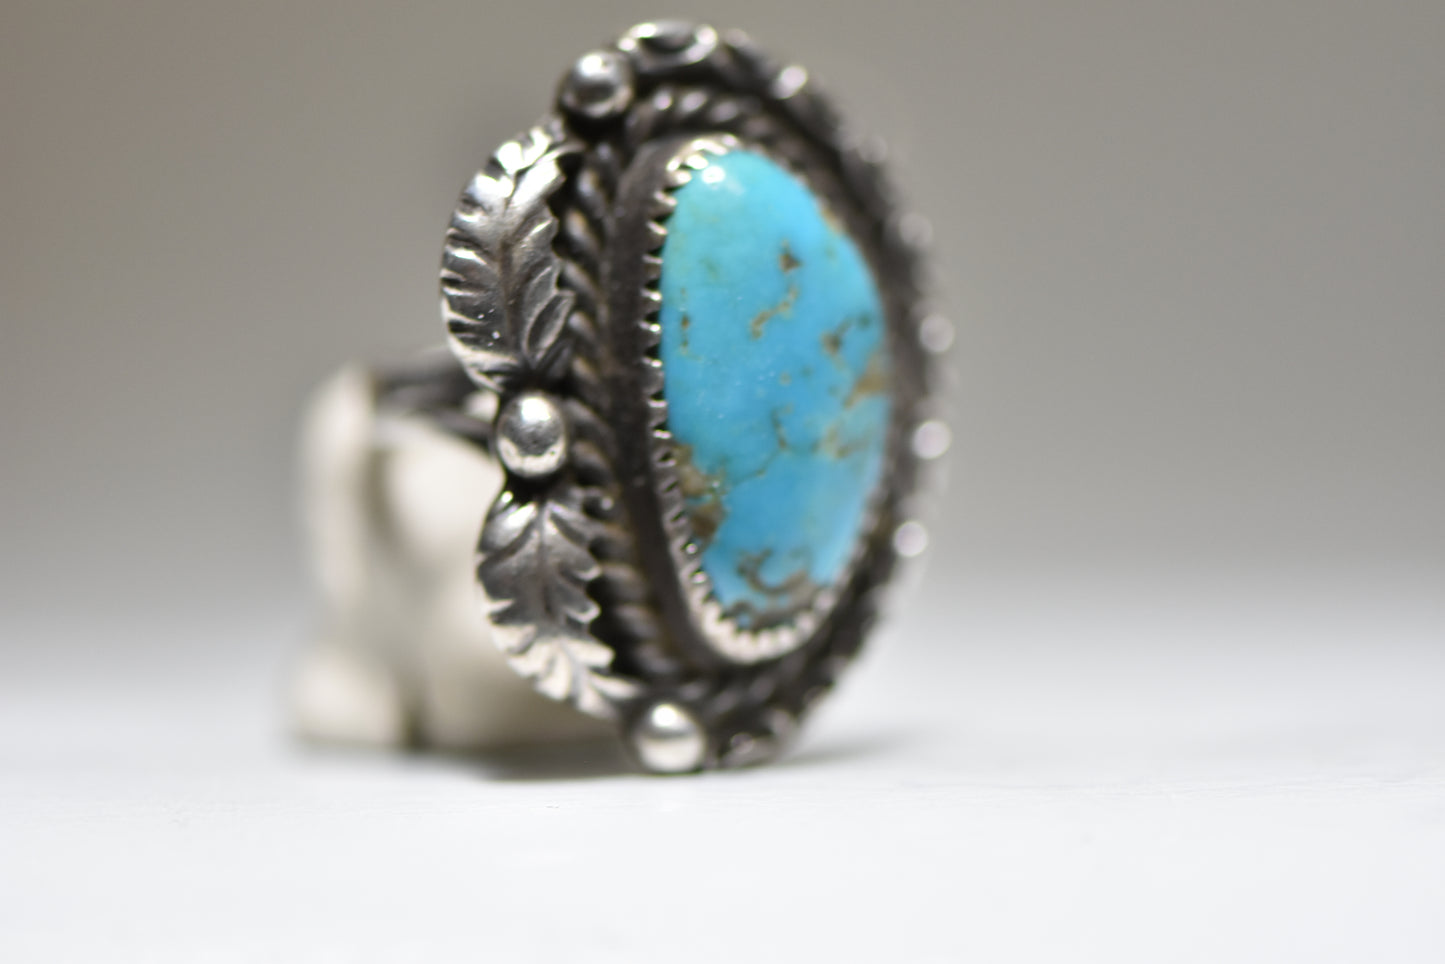 Turquoise ring long Navajo feathers southwest sterling silver